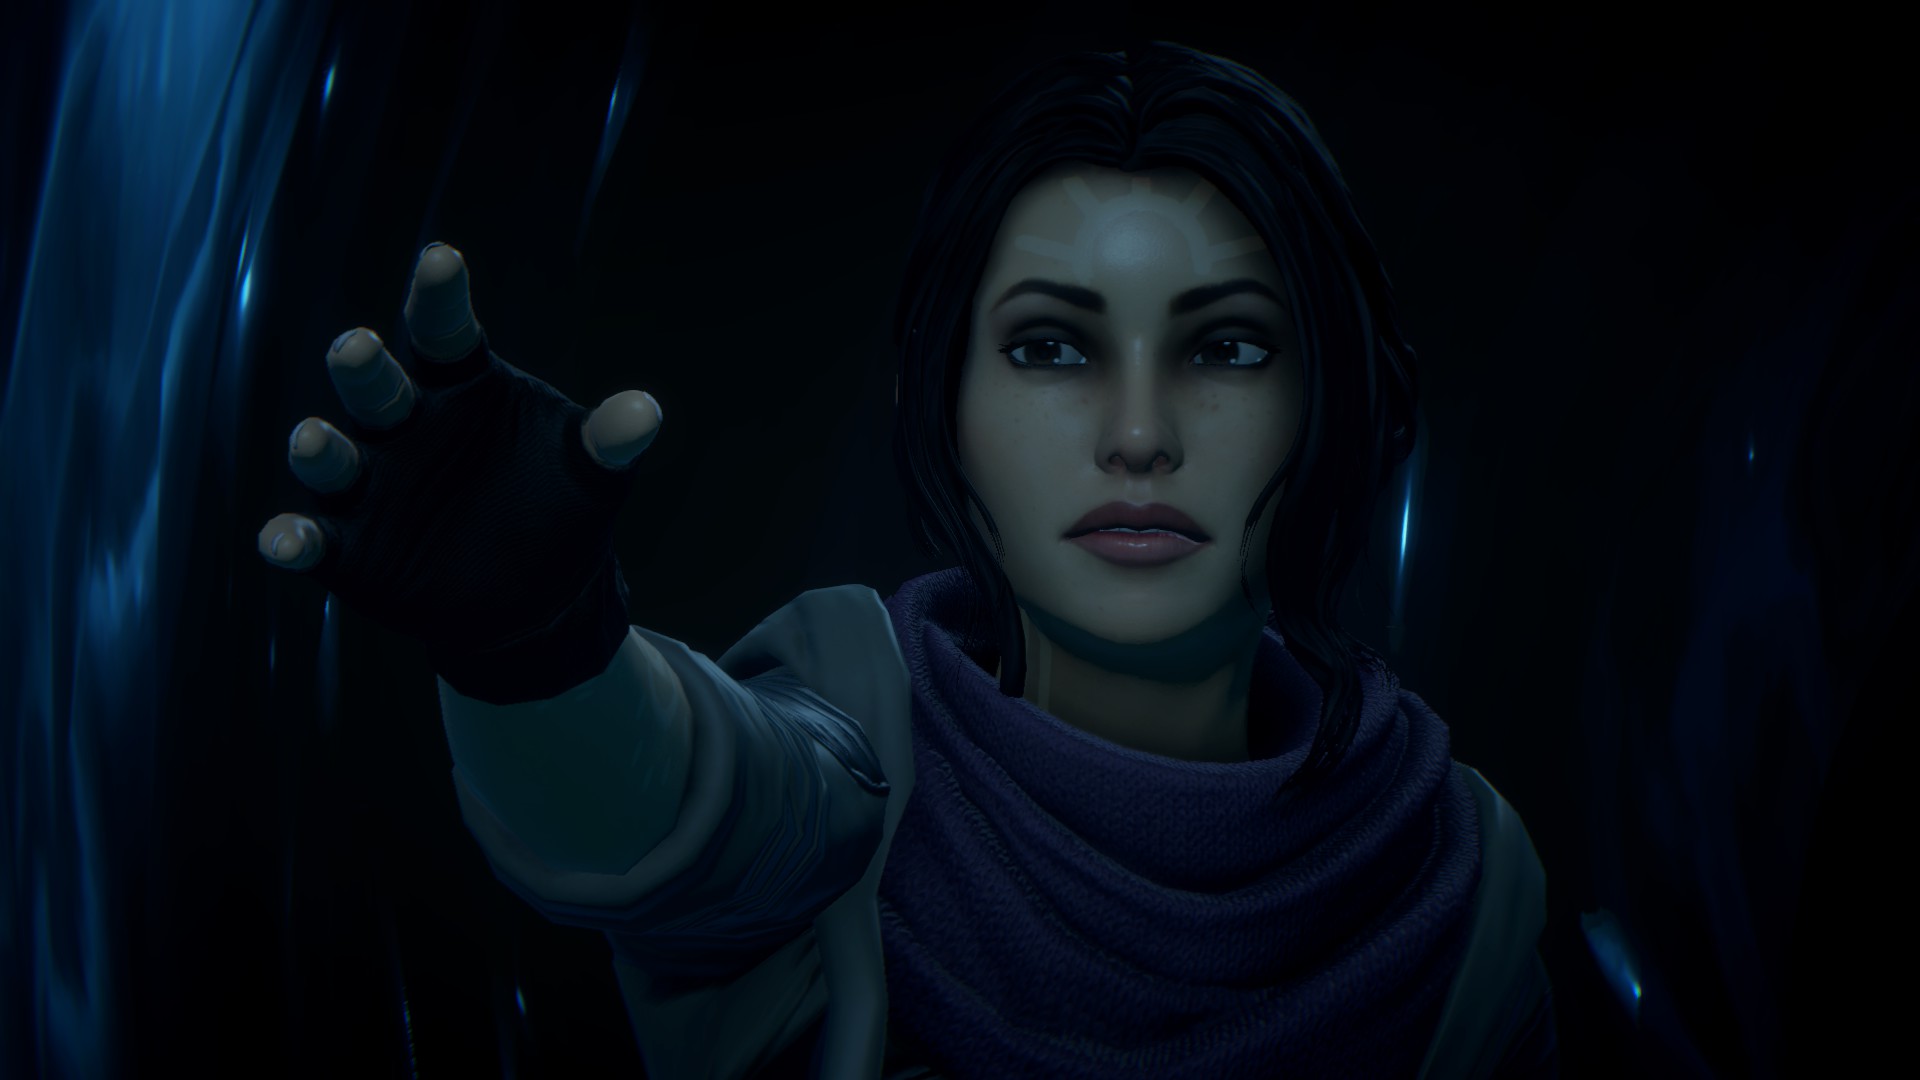 dreamfall chapters zoe outfits